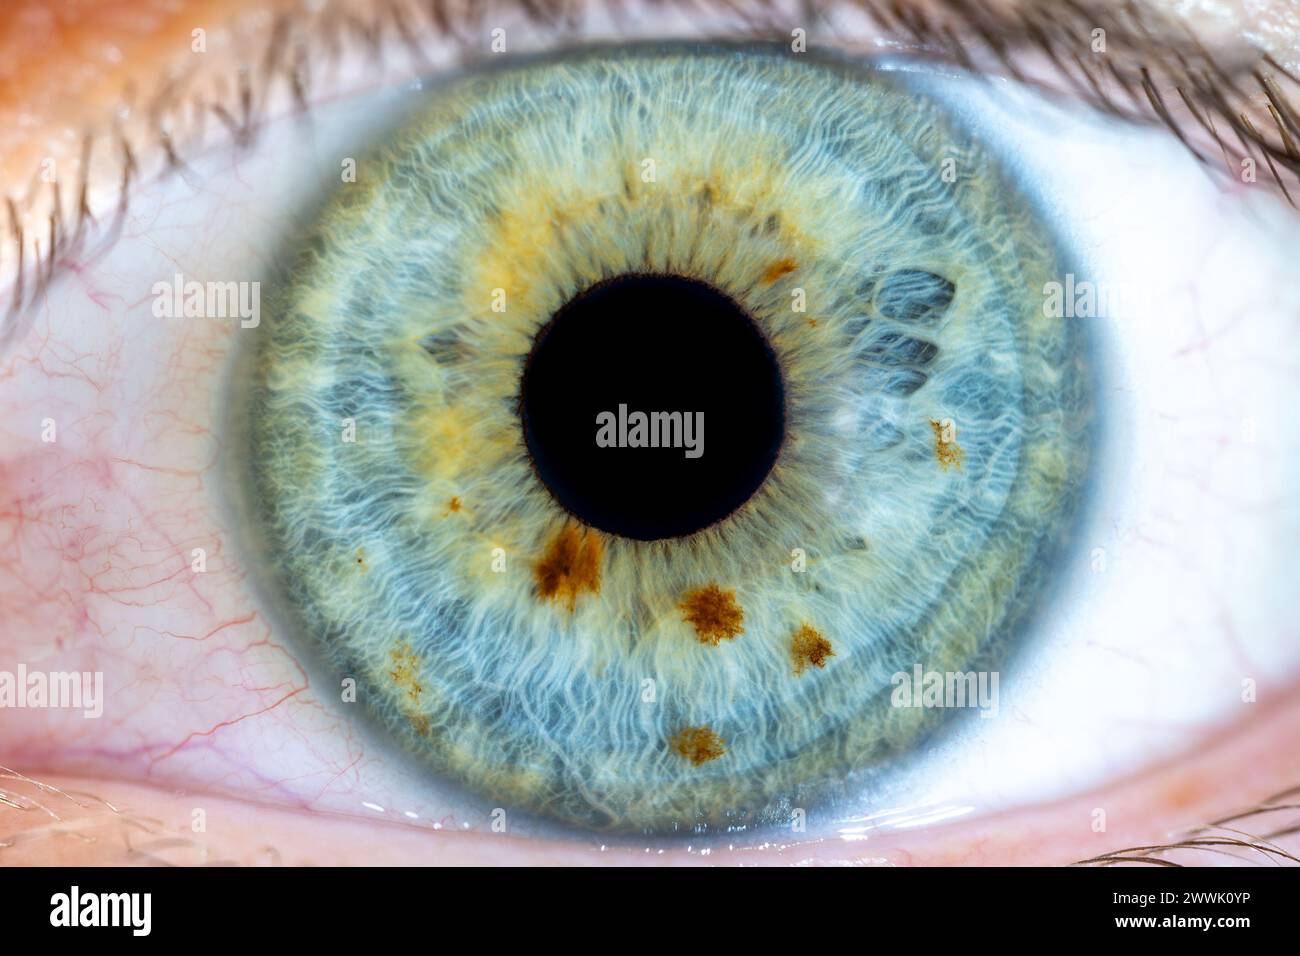 Description: High Resolution Female Green-Blue Colored Eye with Brown Pigment Spots and Pupil Wide Open. Close Up. Structural Anatomy. Human Iris. Mac Stock Photo